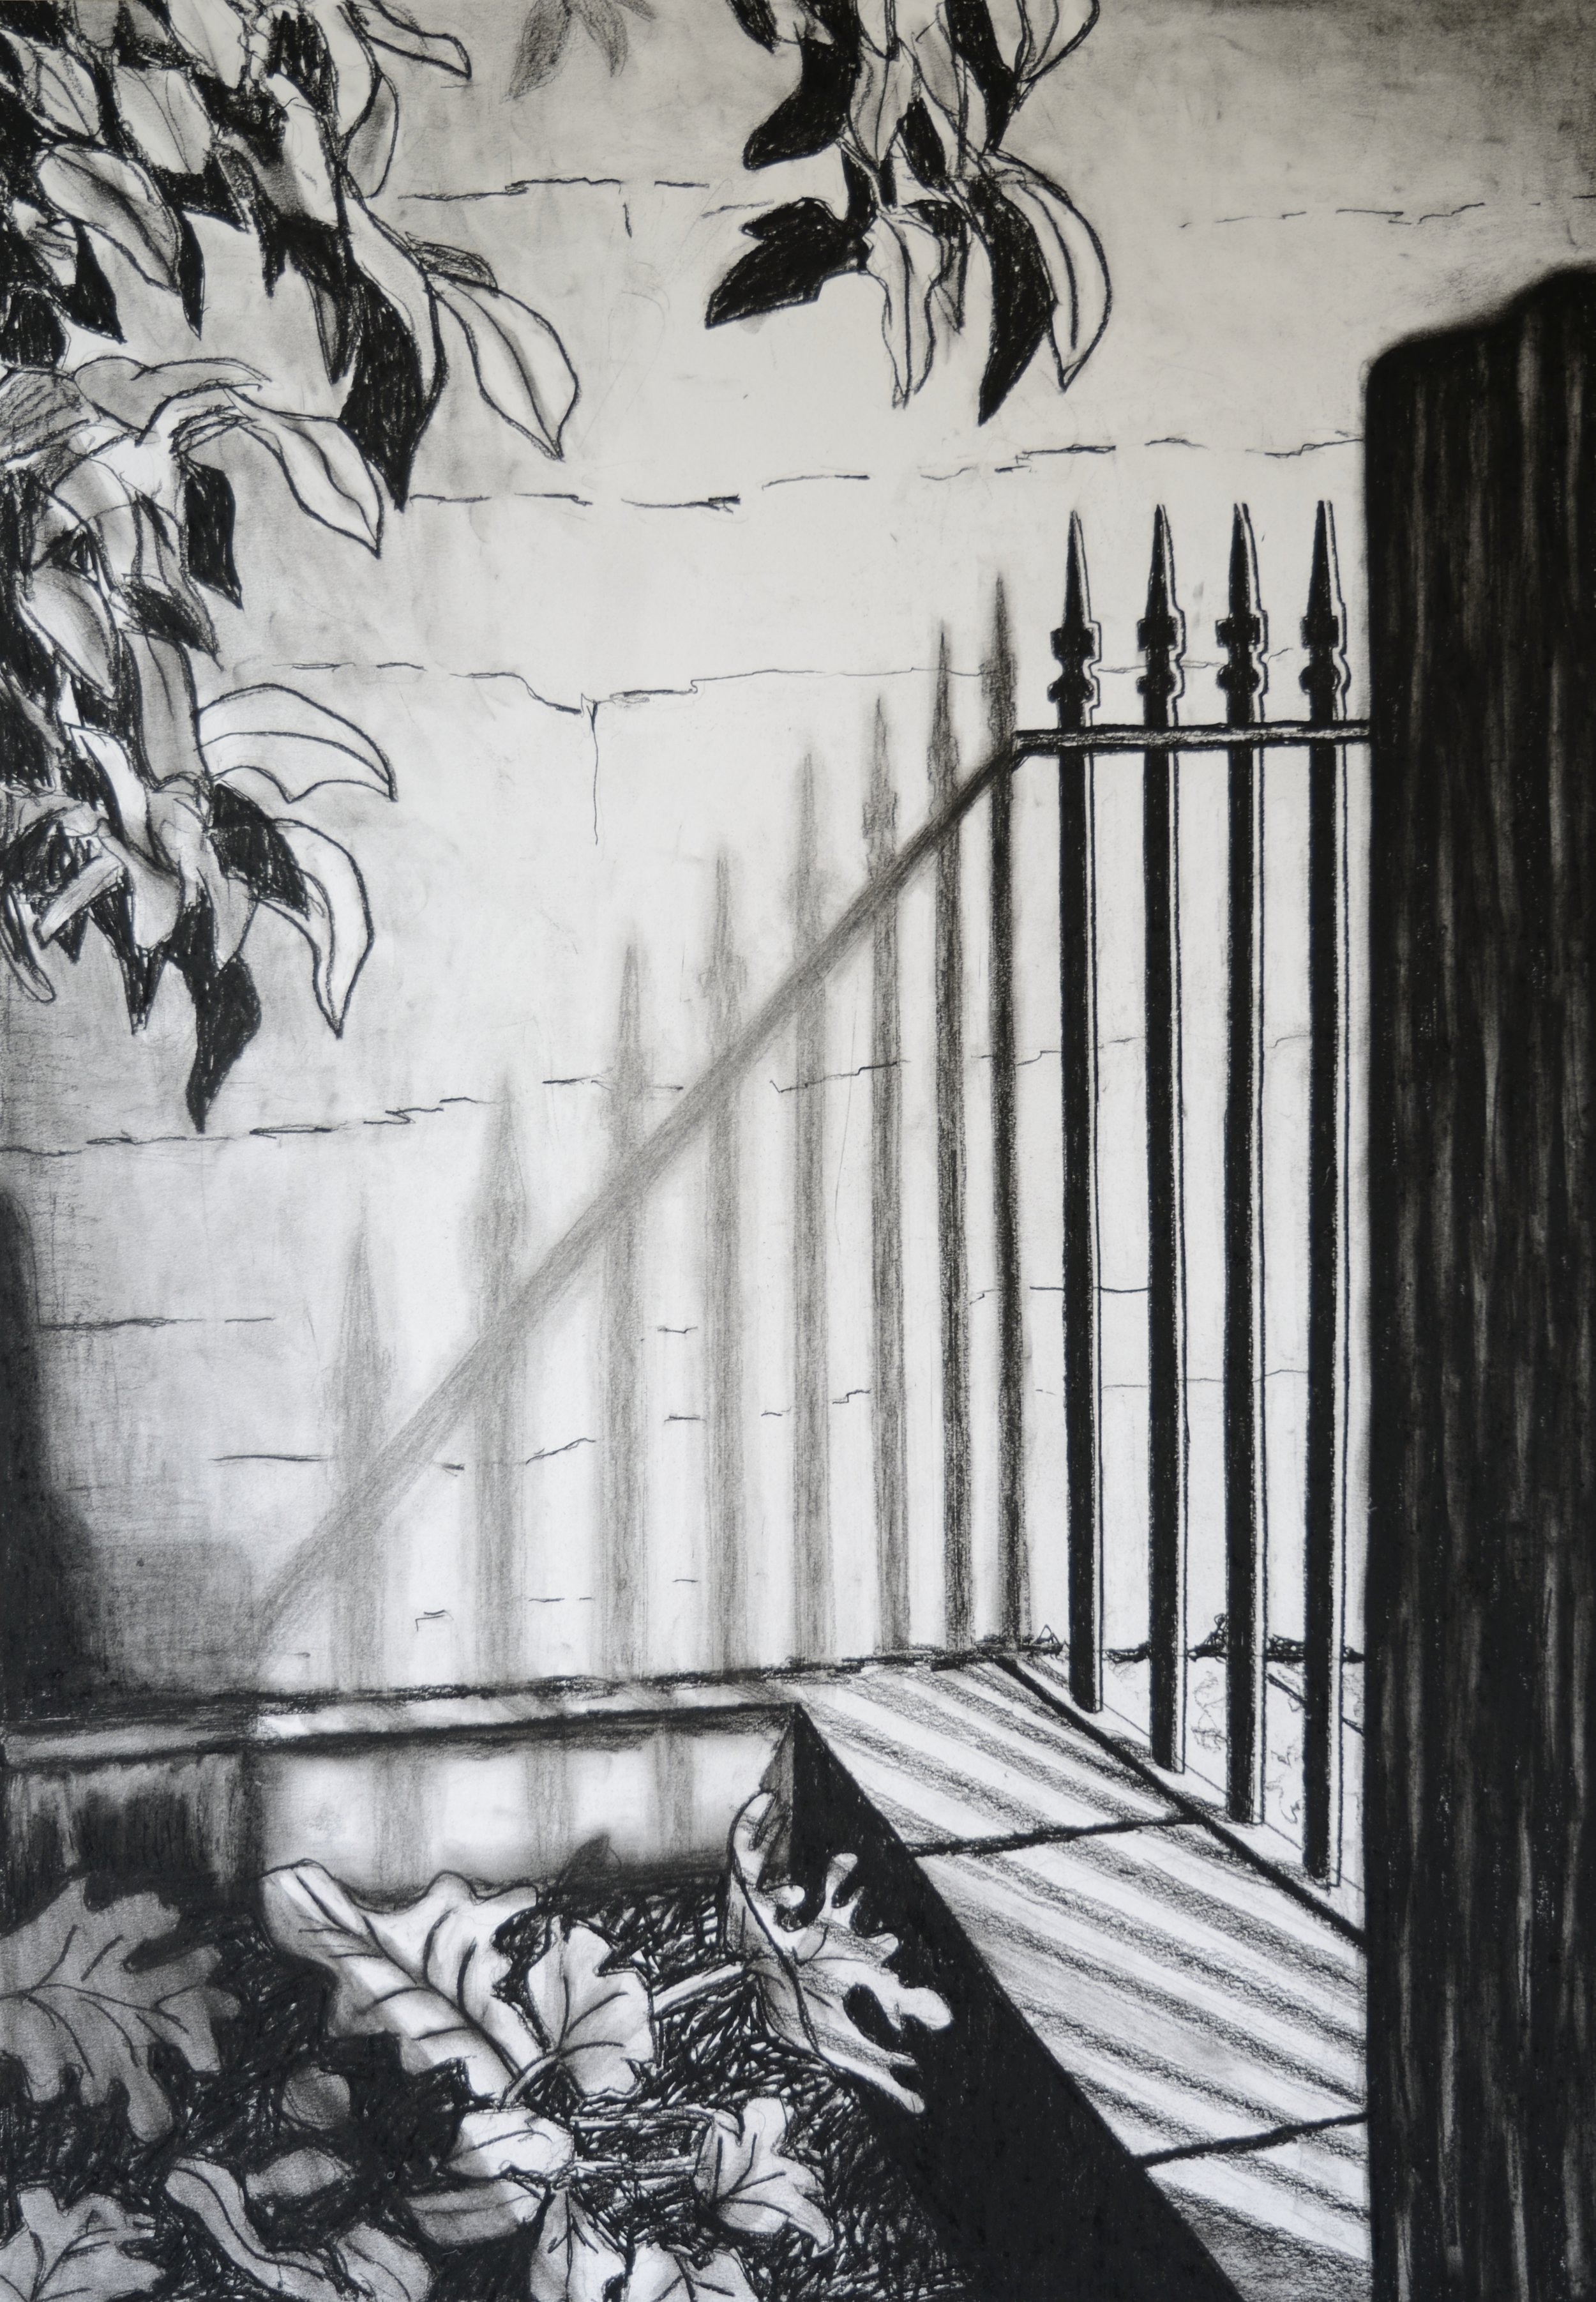 The Fence, 100x70cm, conte on paper